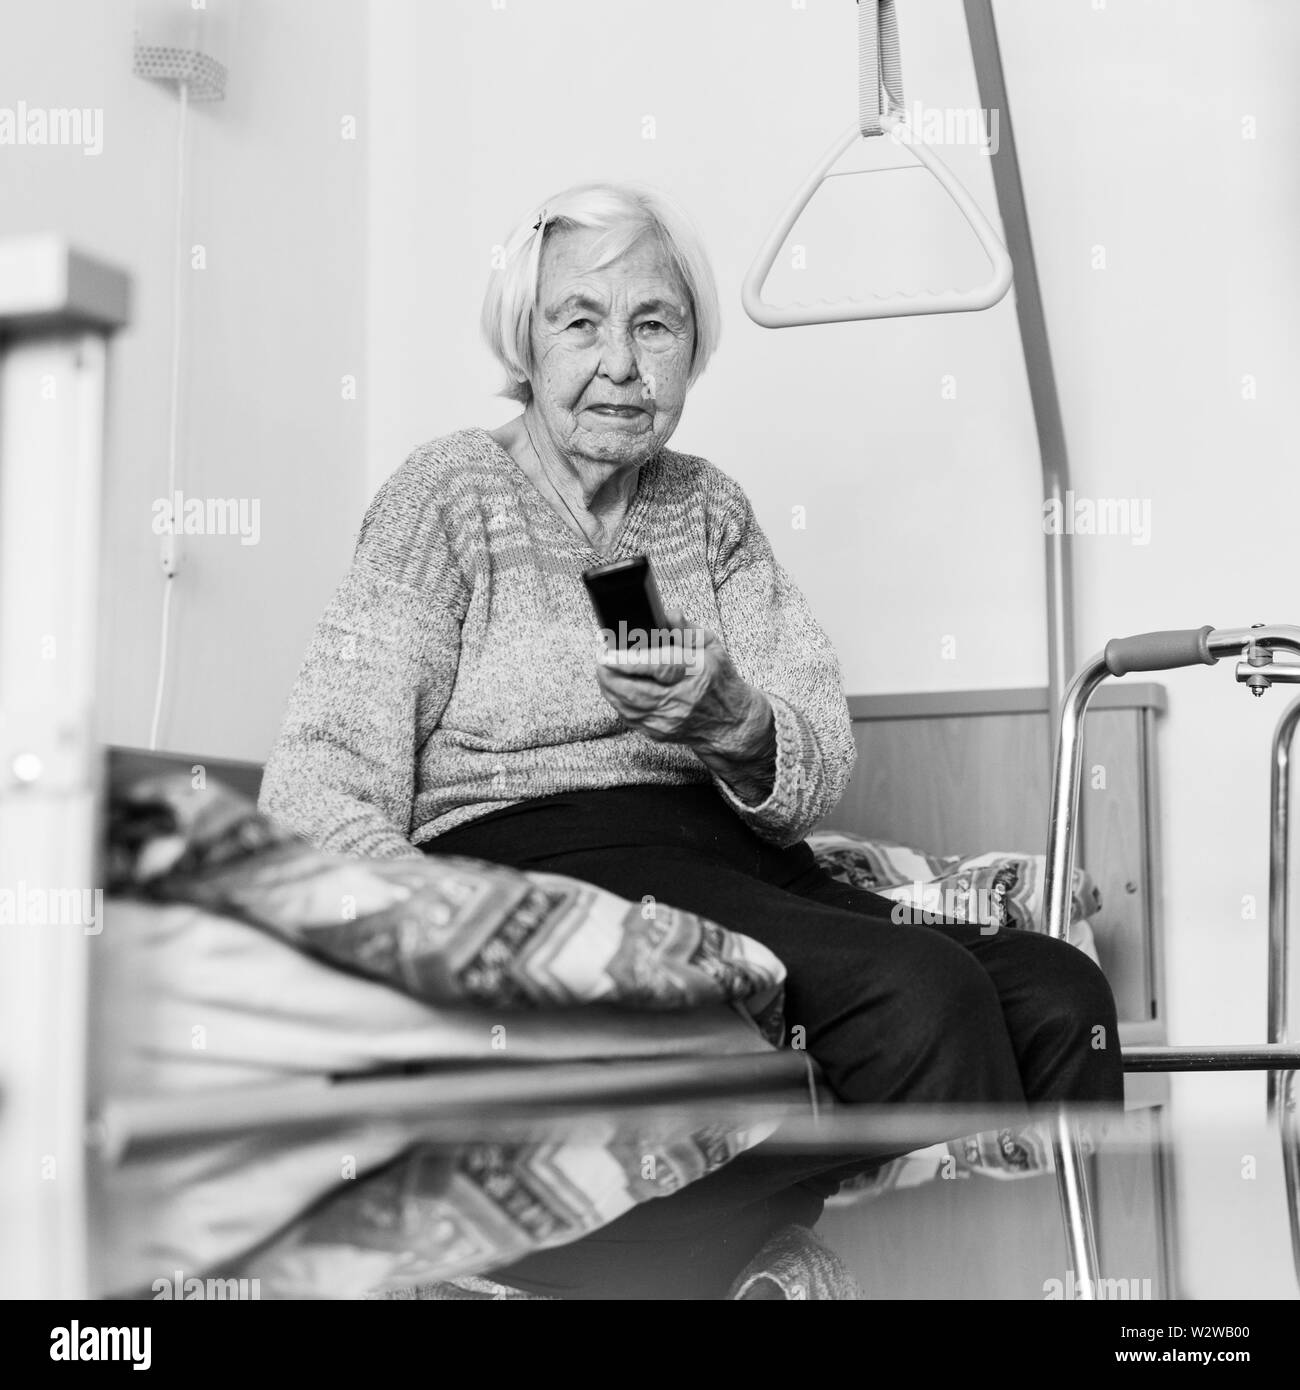 Elderly 96 years old woman operating TV or DVD with remote control in black and white. Stock Photo